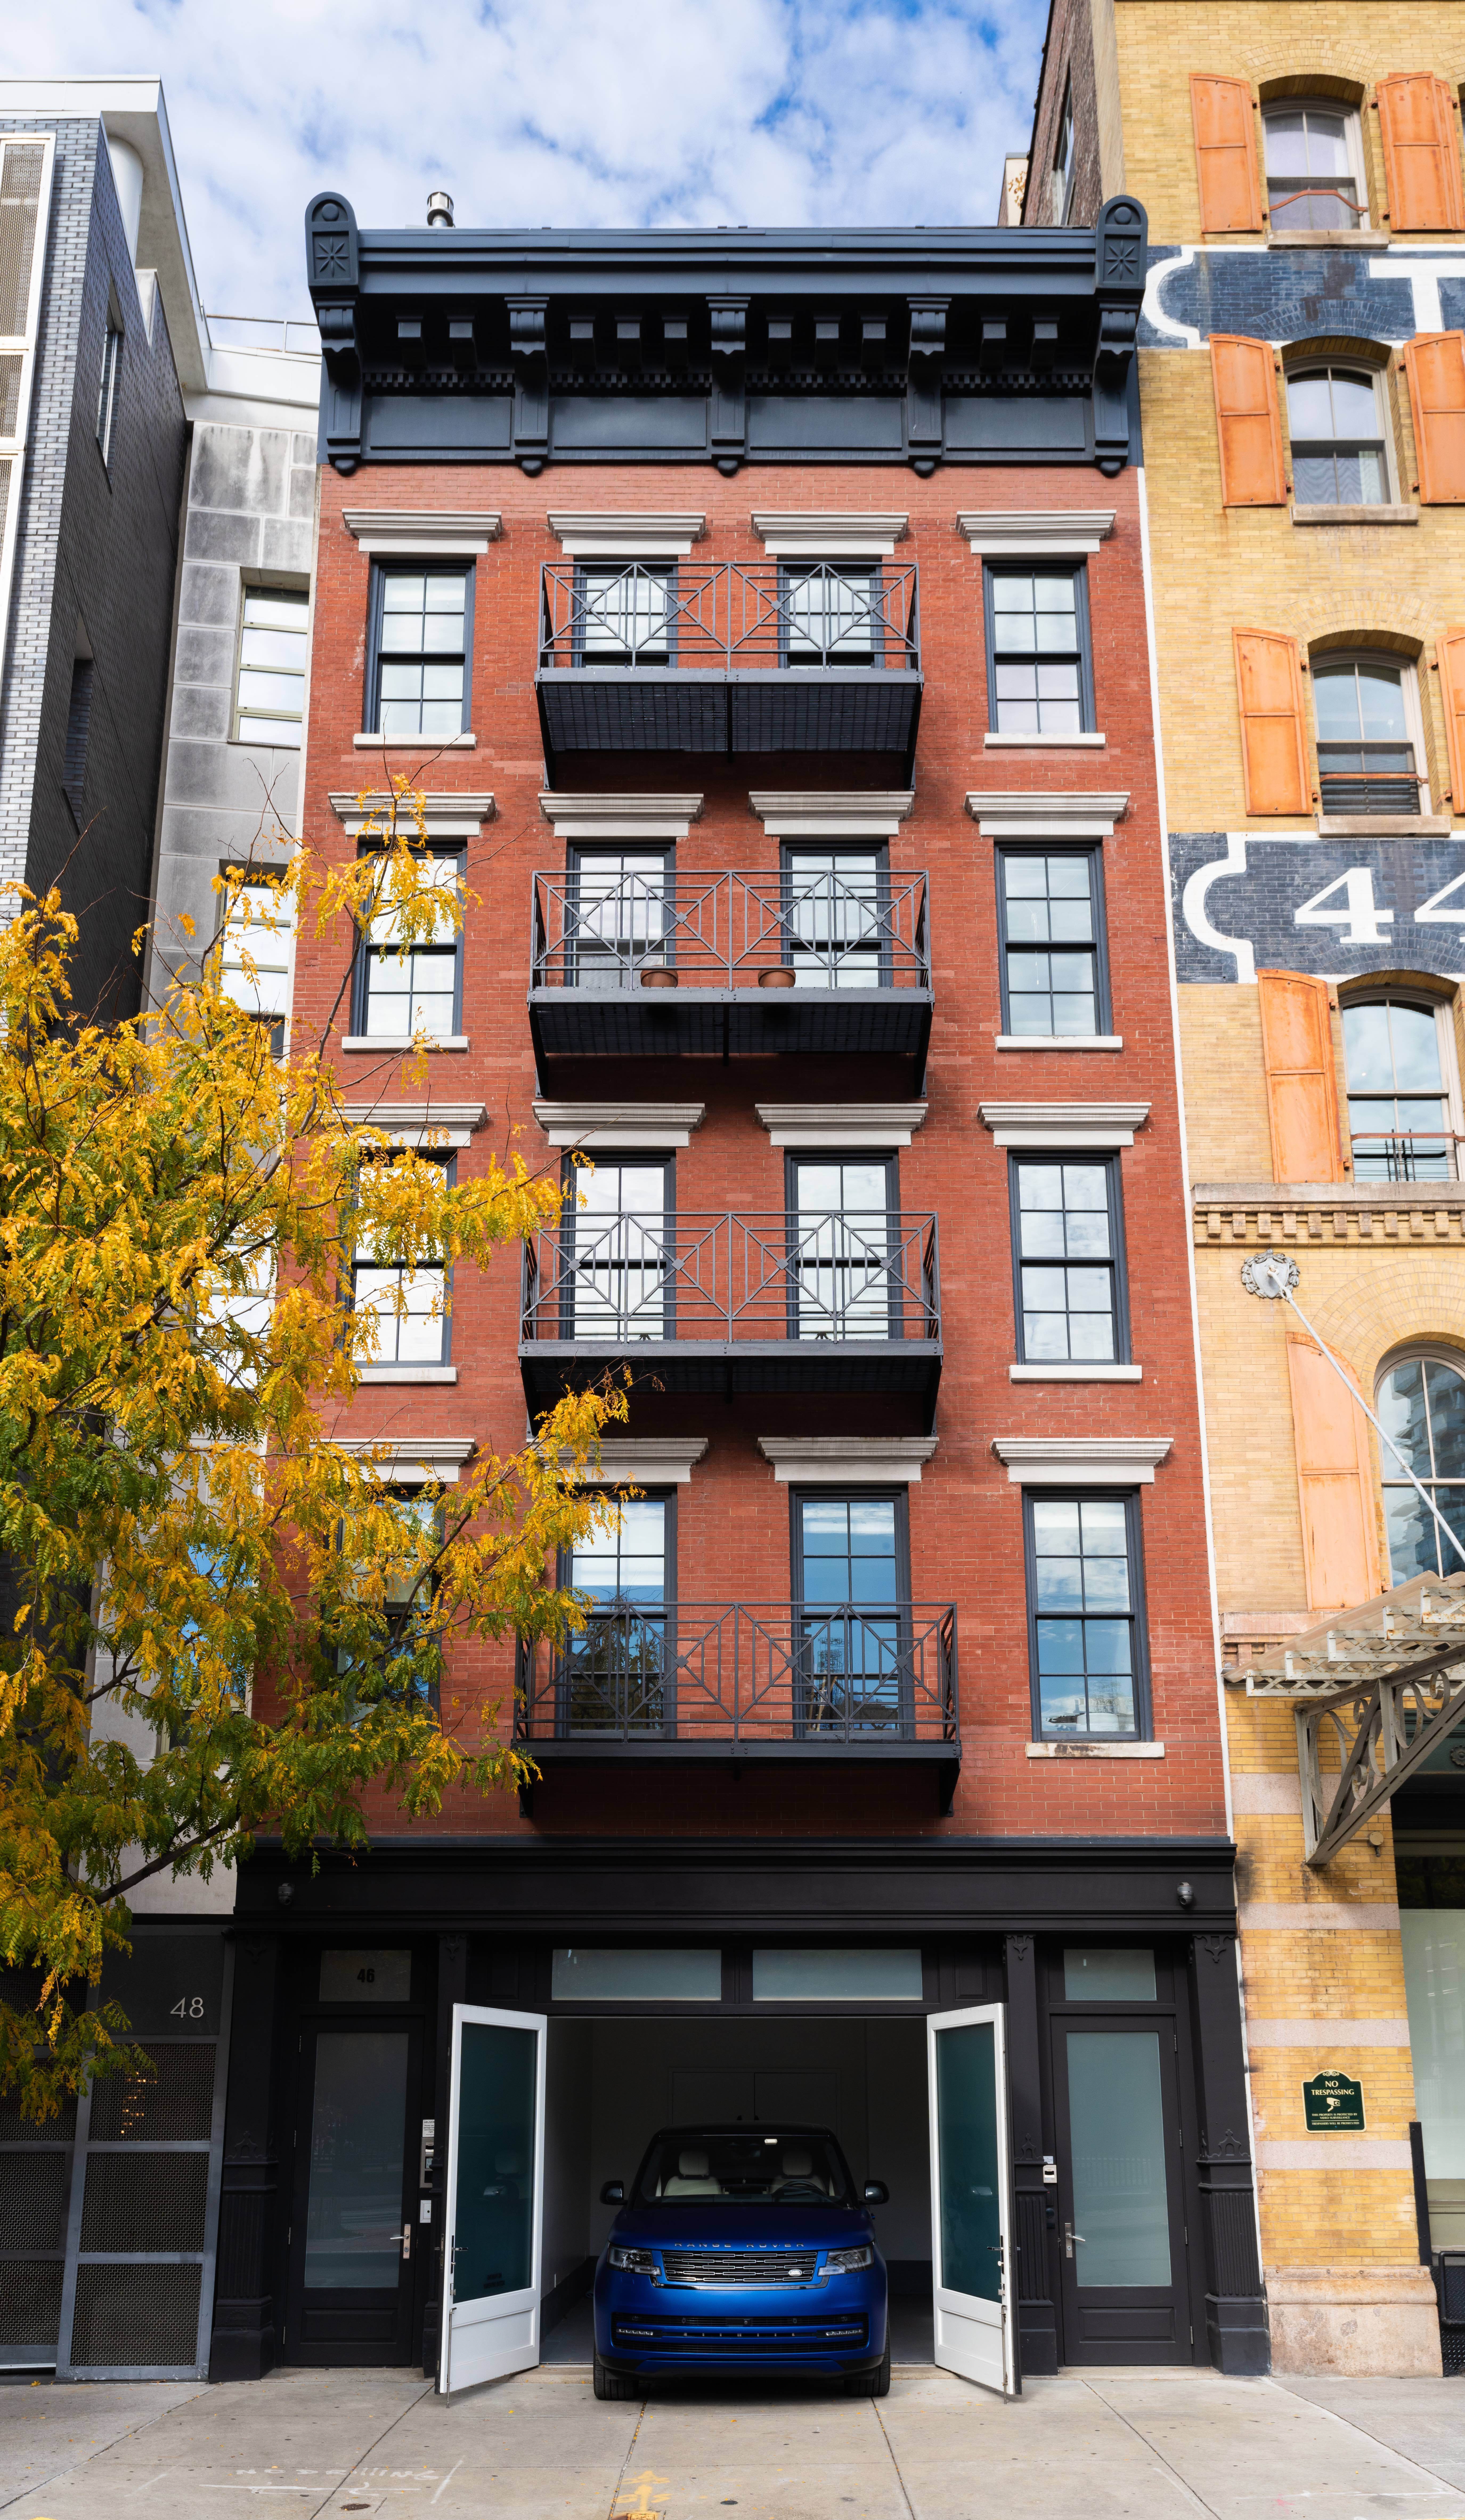 46 Laight Street, Tribeca, Downtown, NYC - 11 Bedrooms  
12 Bathrooms  
20 Rooms - 